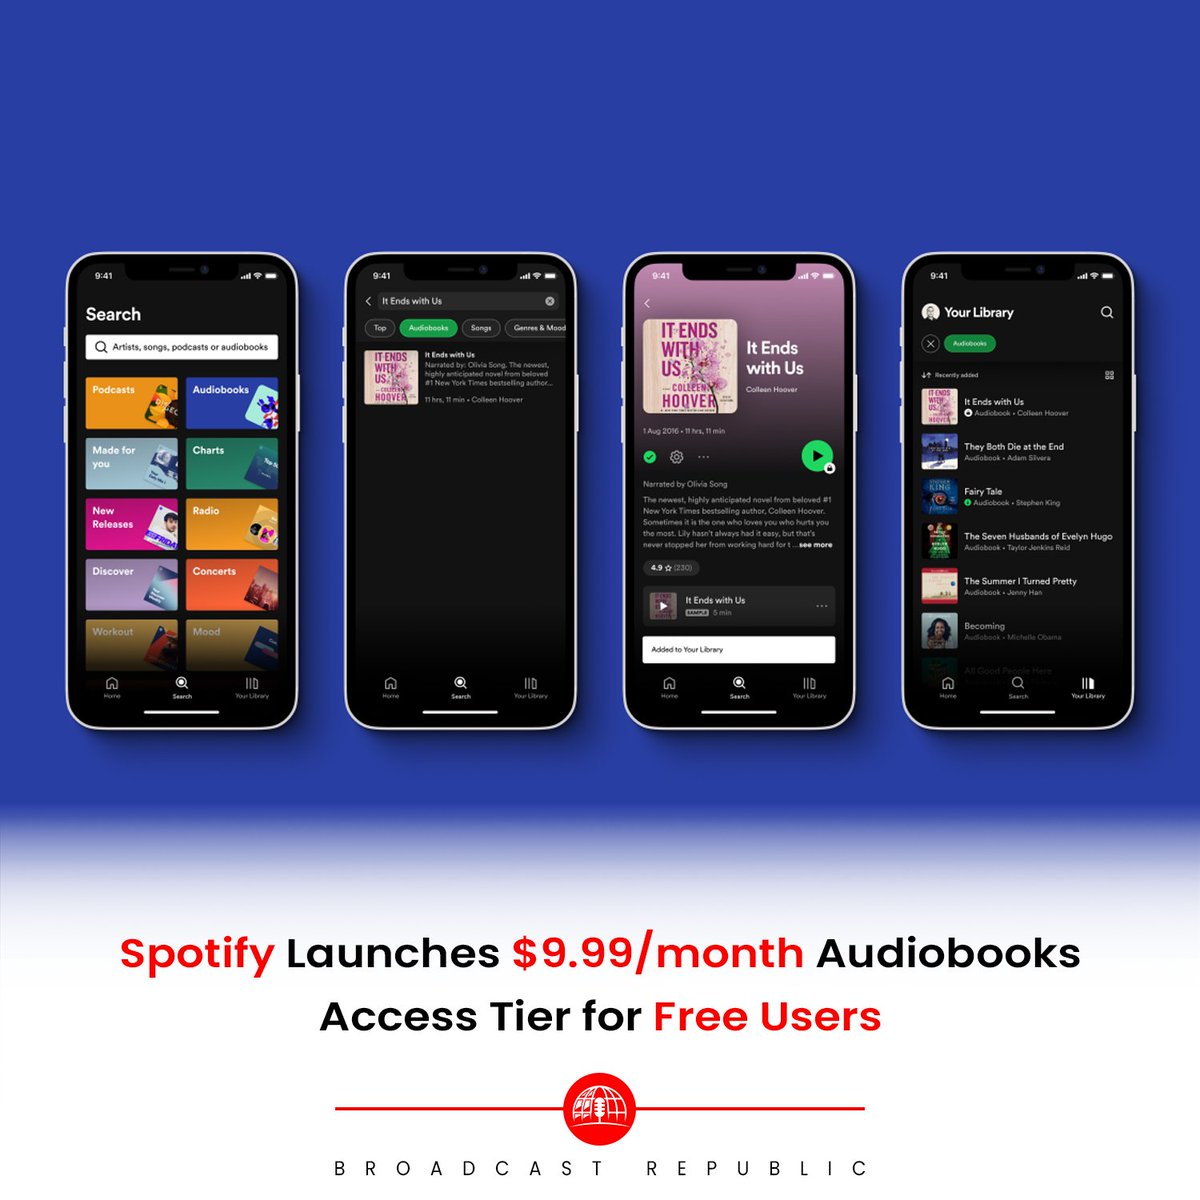 Spotify is expanding its audiobook offerings with a new $9.99 per month 'Audiobooks Access Tier,' allowing free users to access over 200,000 titles for 15 hours of streaming. 

#BroadcastRepublic #SpotifyAudiobooks #Audiobooks #DigitalEntertainment #Spotify